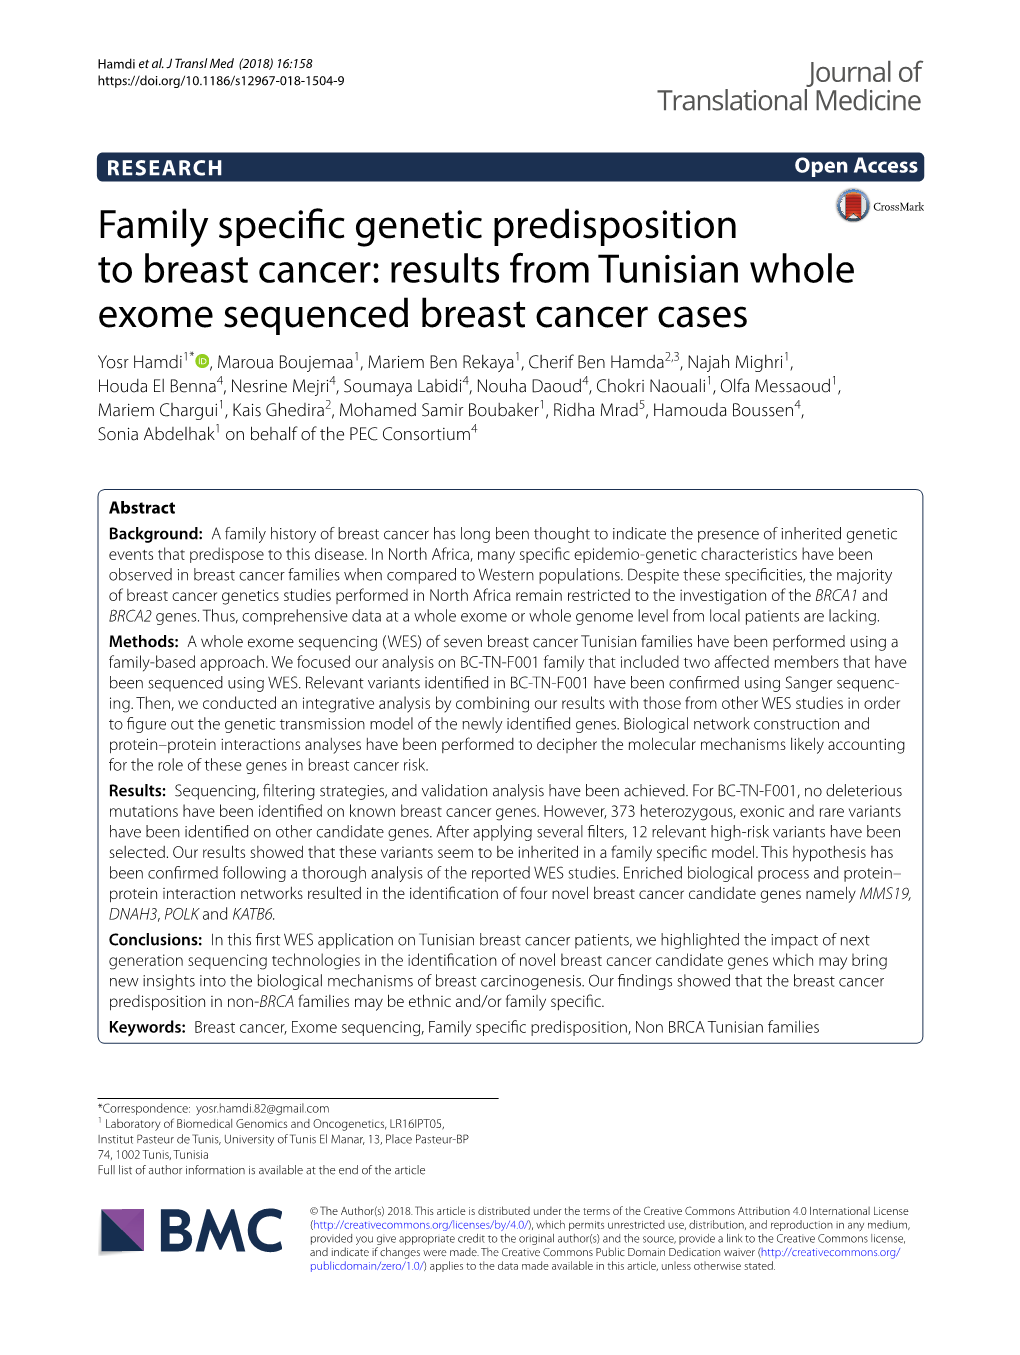 Family Specific Genetic Predisposition to Breast Cancer: Results From